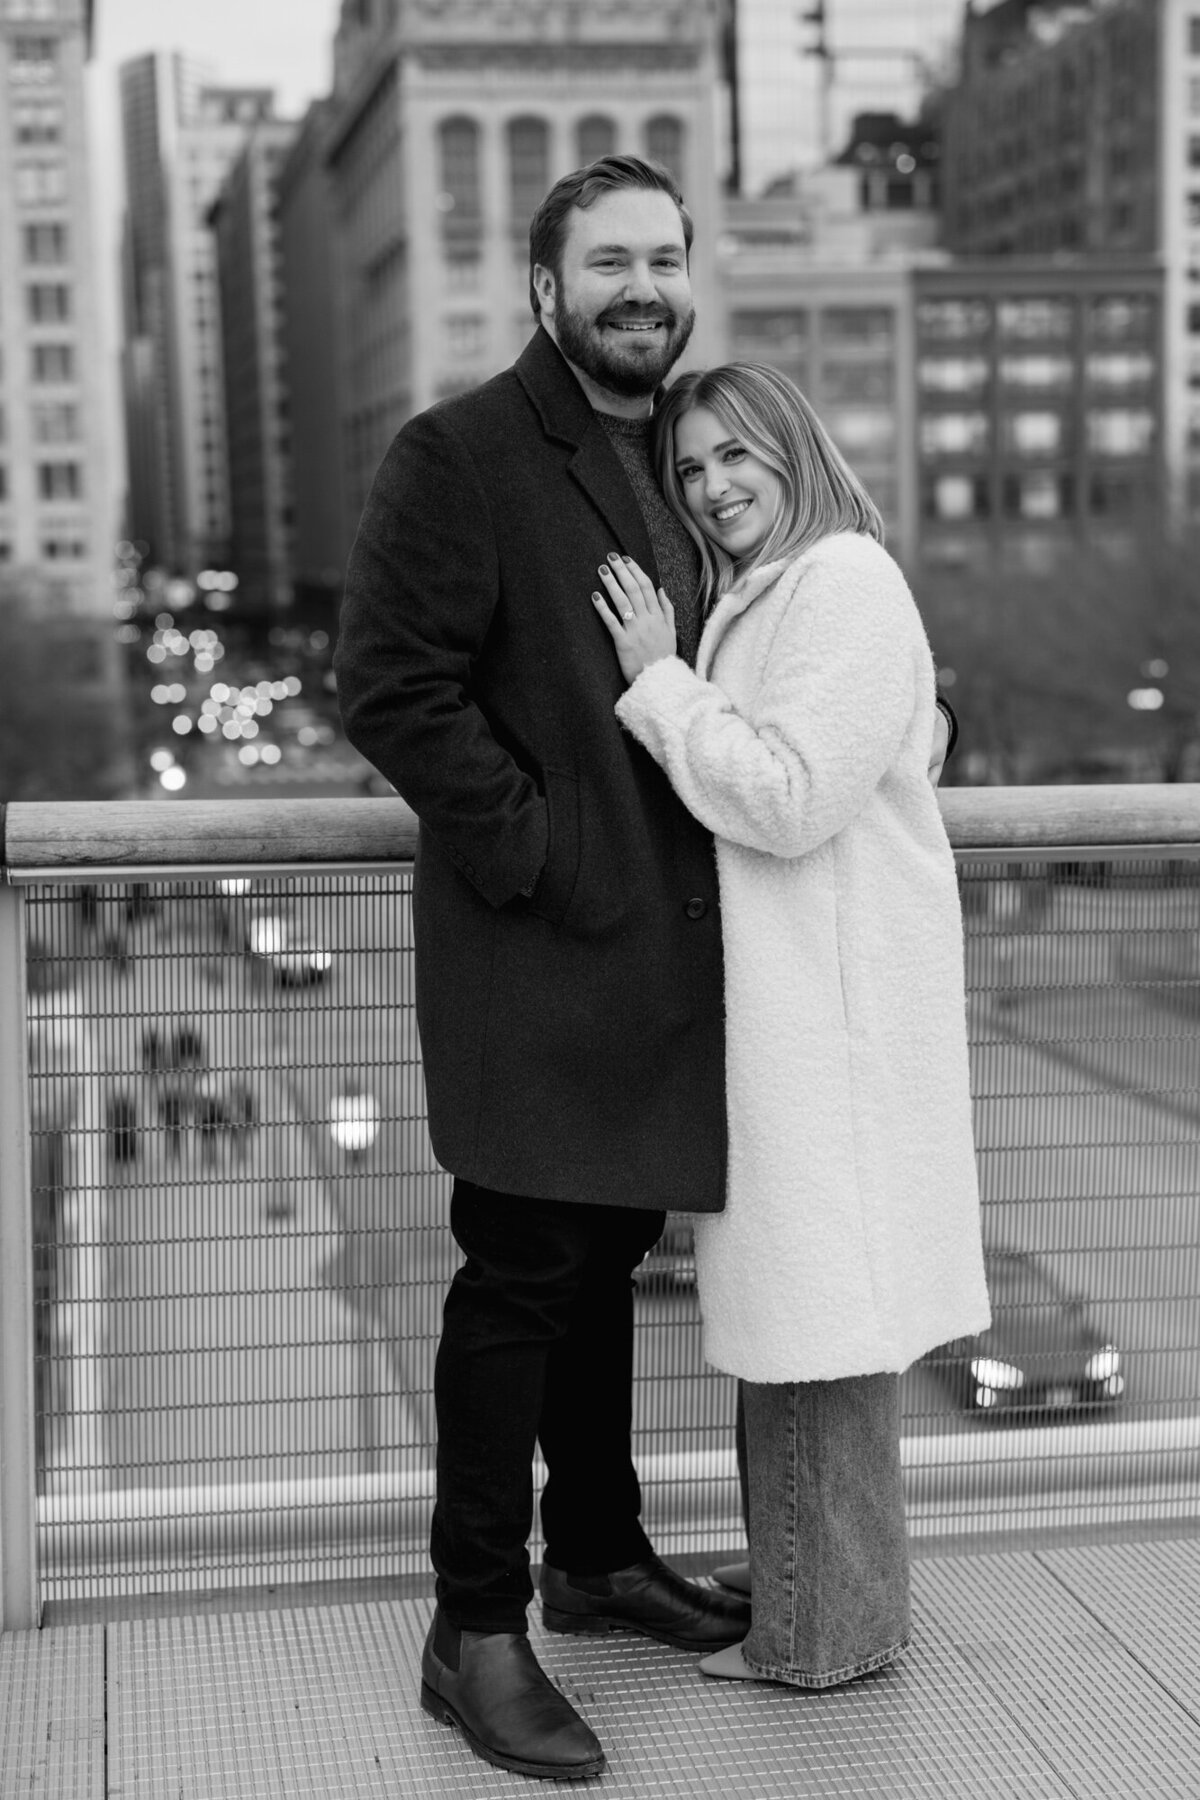 A couple smiles at the camera as they pose for an engagement photo during the winter in downtown Chicago